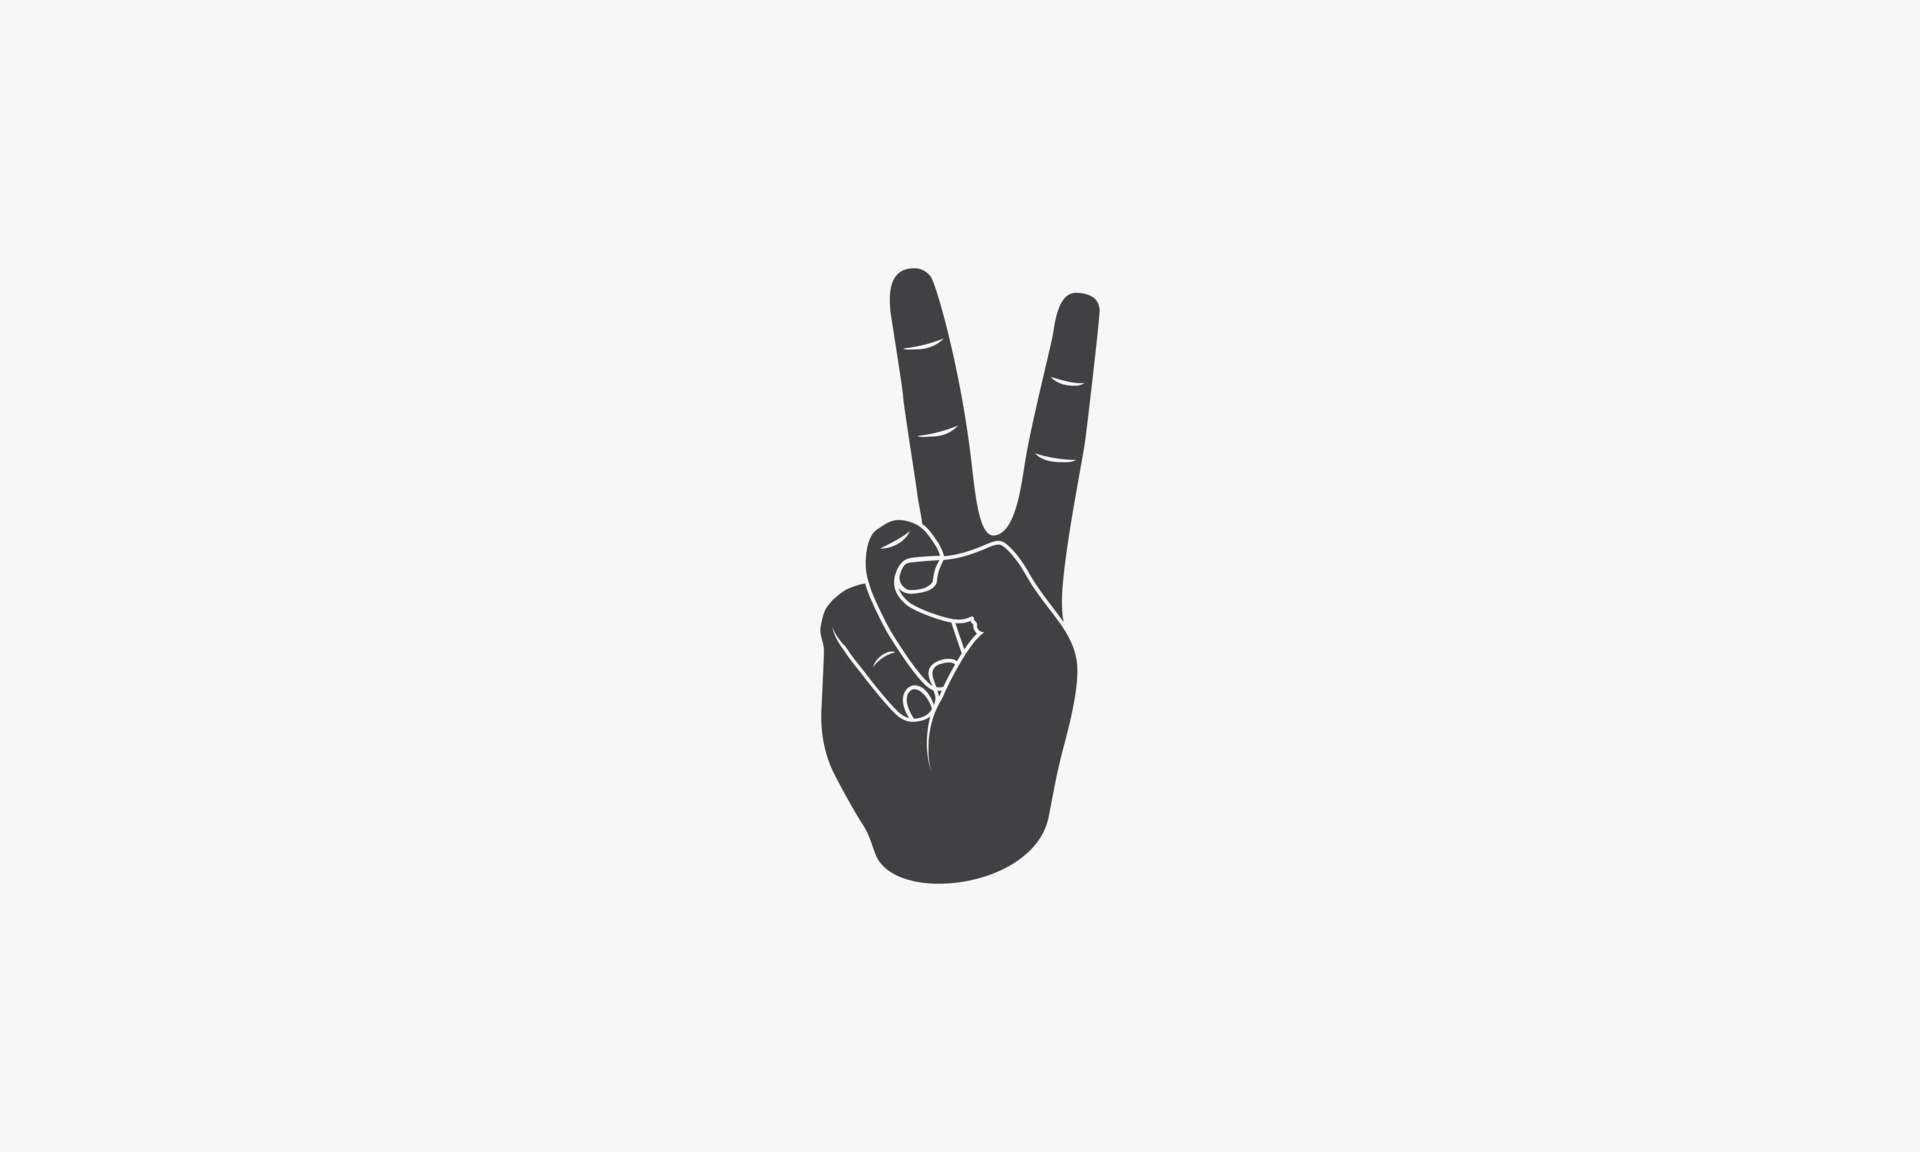 two finger peace gesture hand .creative icon. vector illustration. isolated on white background